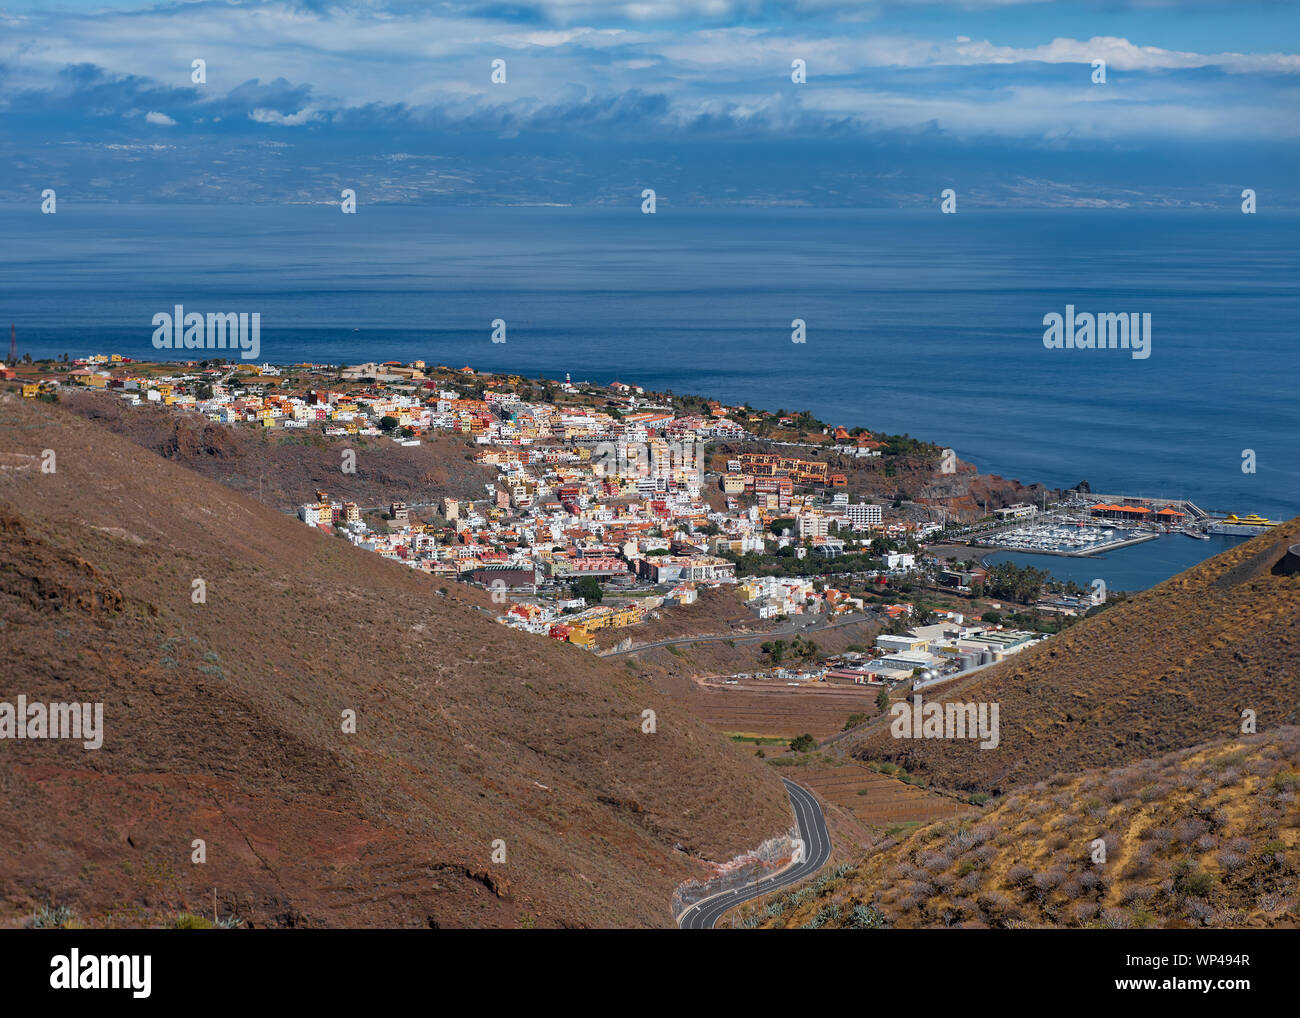 View of Tenerife island beneath the clouds. With San Sebastian de La Gomera, the capital  in the foreground with the Atlantic Ocean in between.  Clear Stock Photo